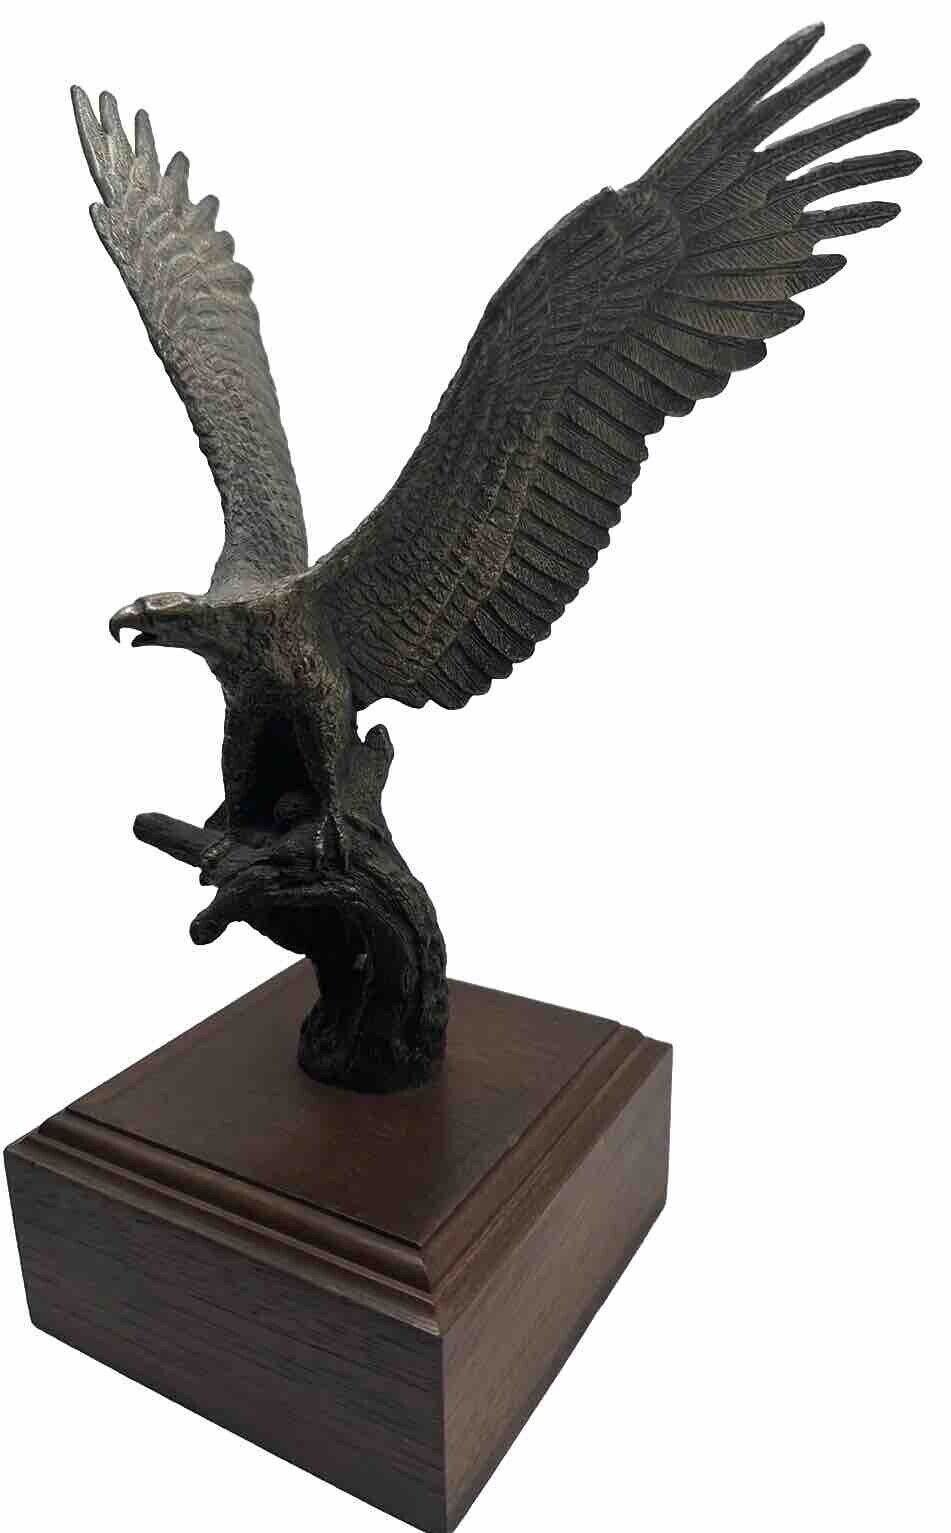 Eagle Statue Bronze Vintage The Great American Eagle Figure Wooden Stand 12x8”